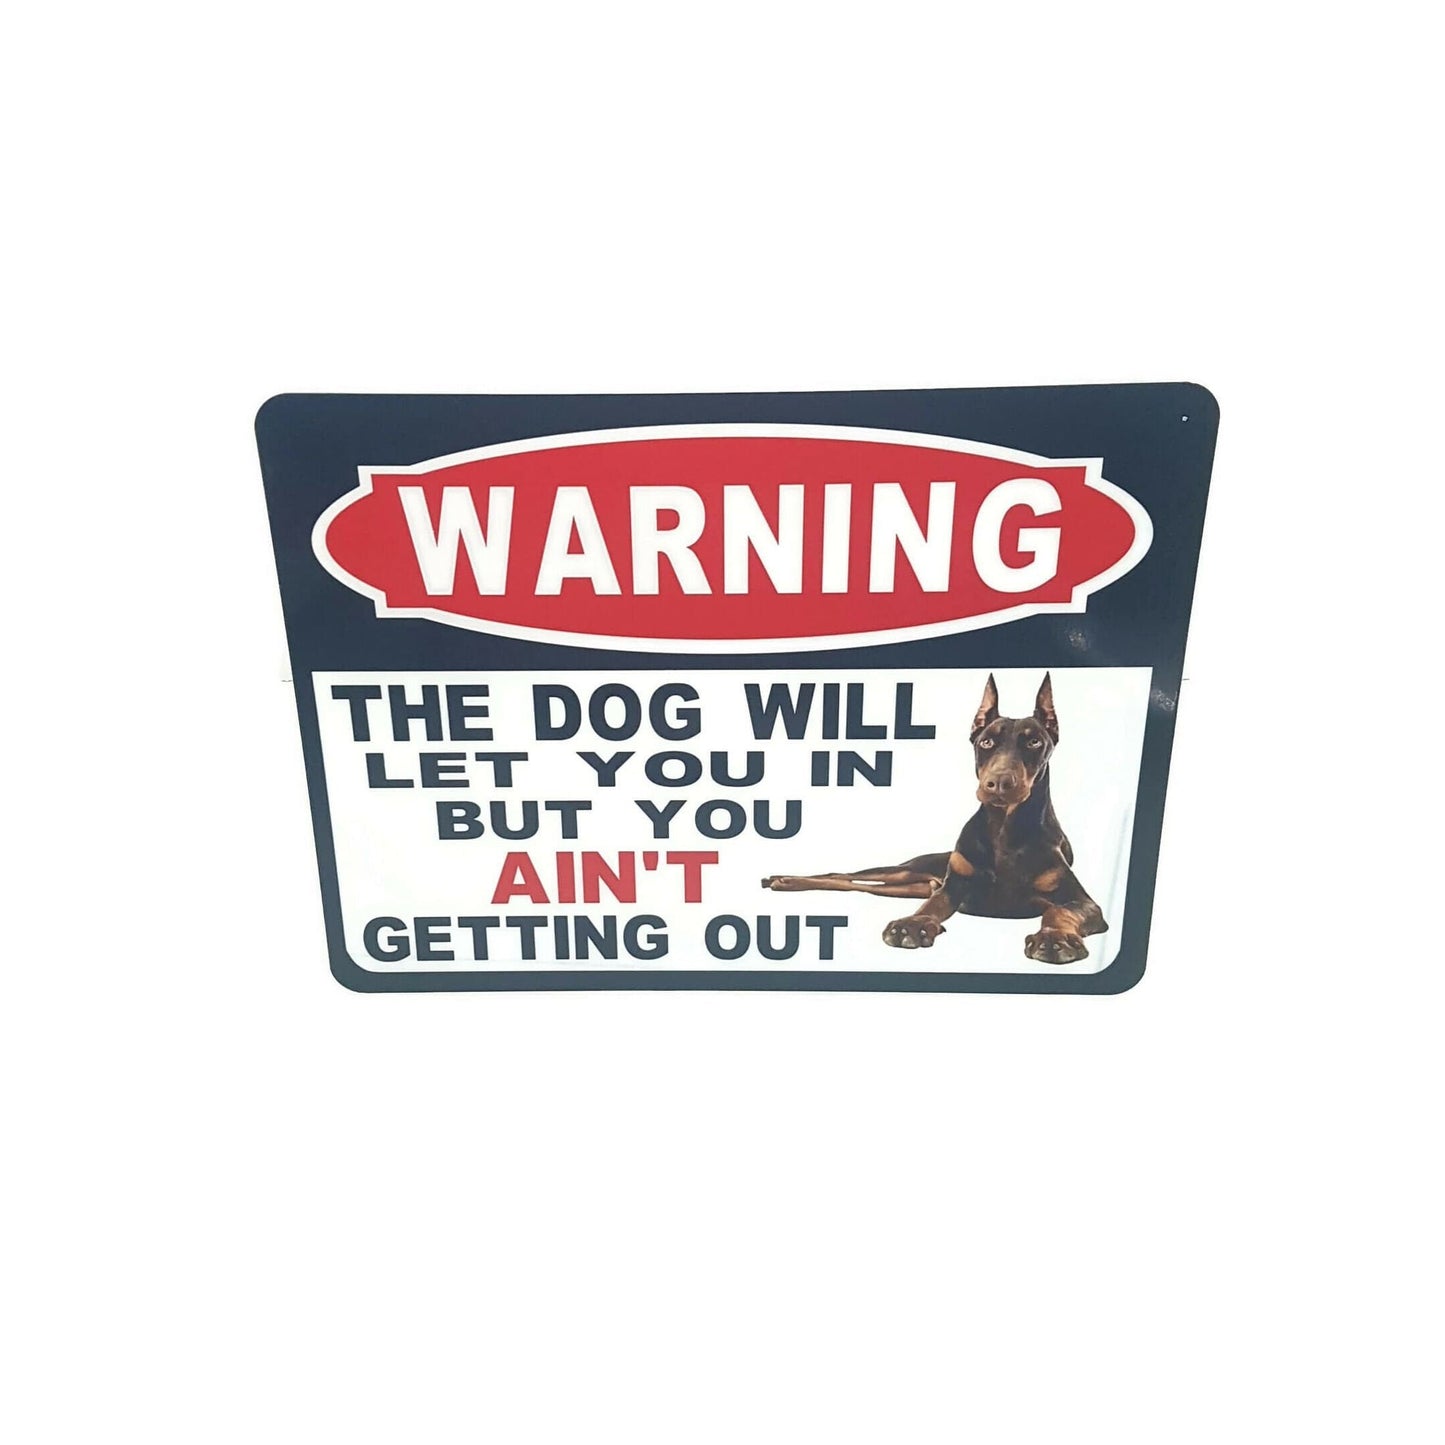 warning the dog will let you in but you ain't getting out